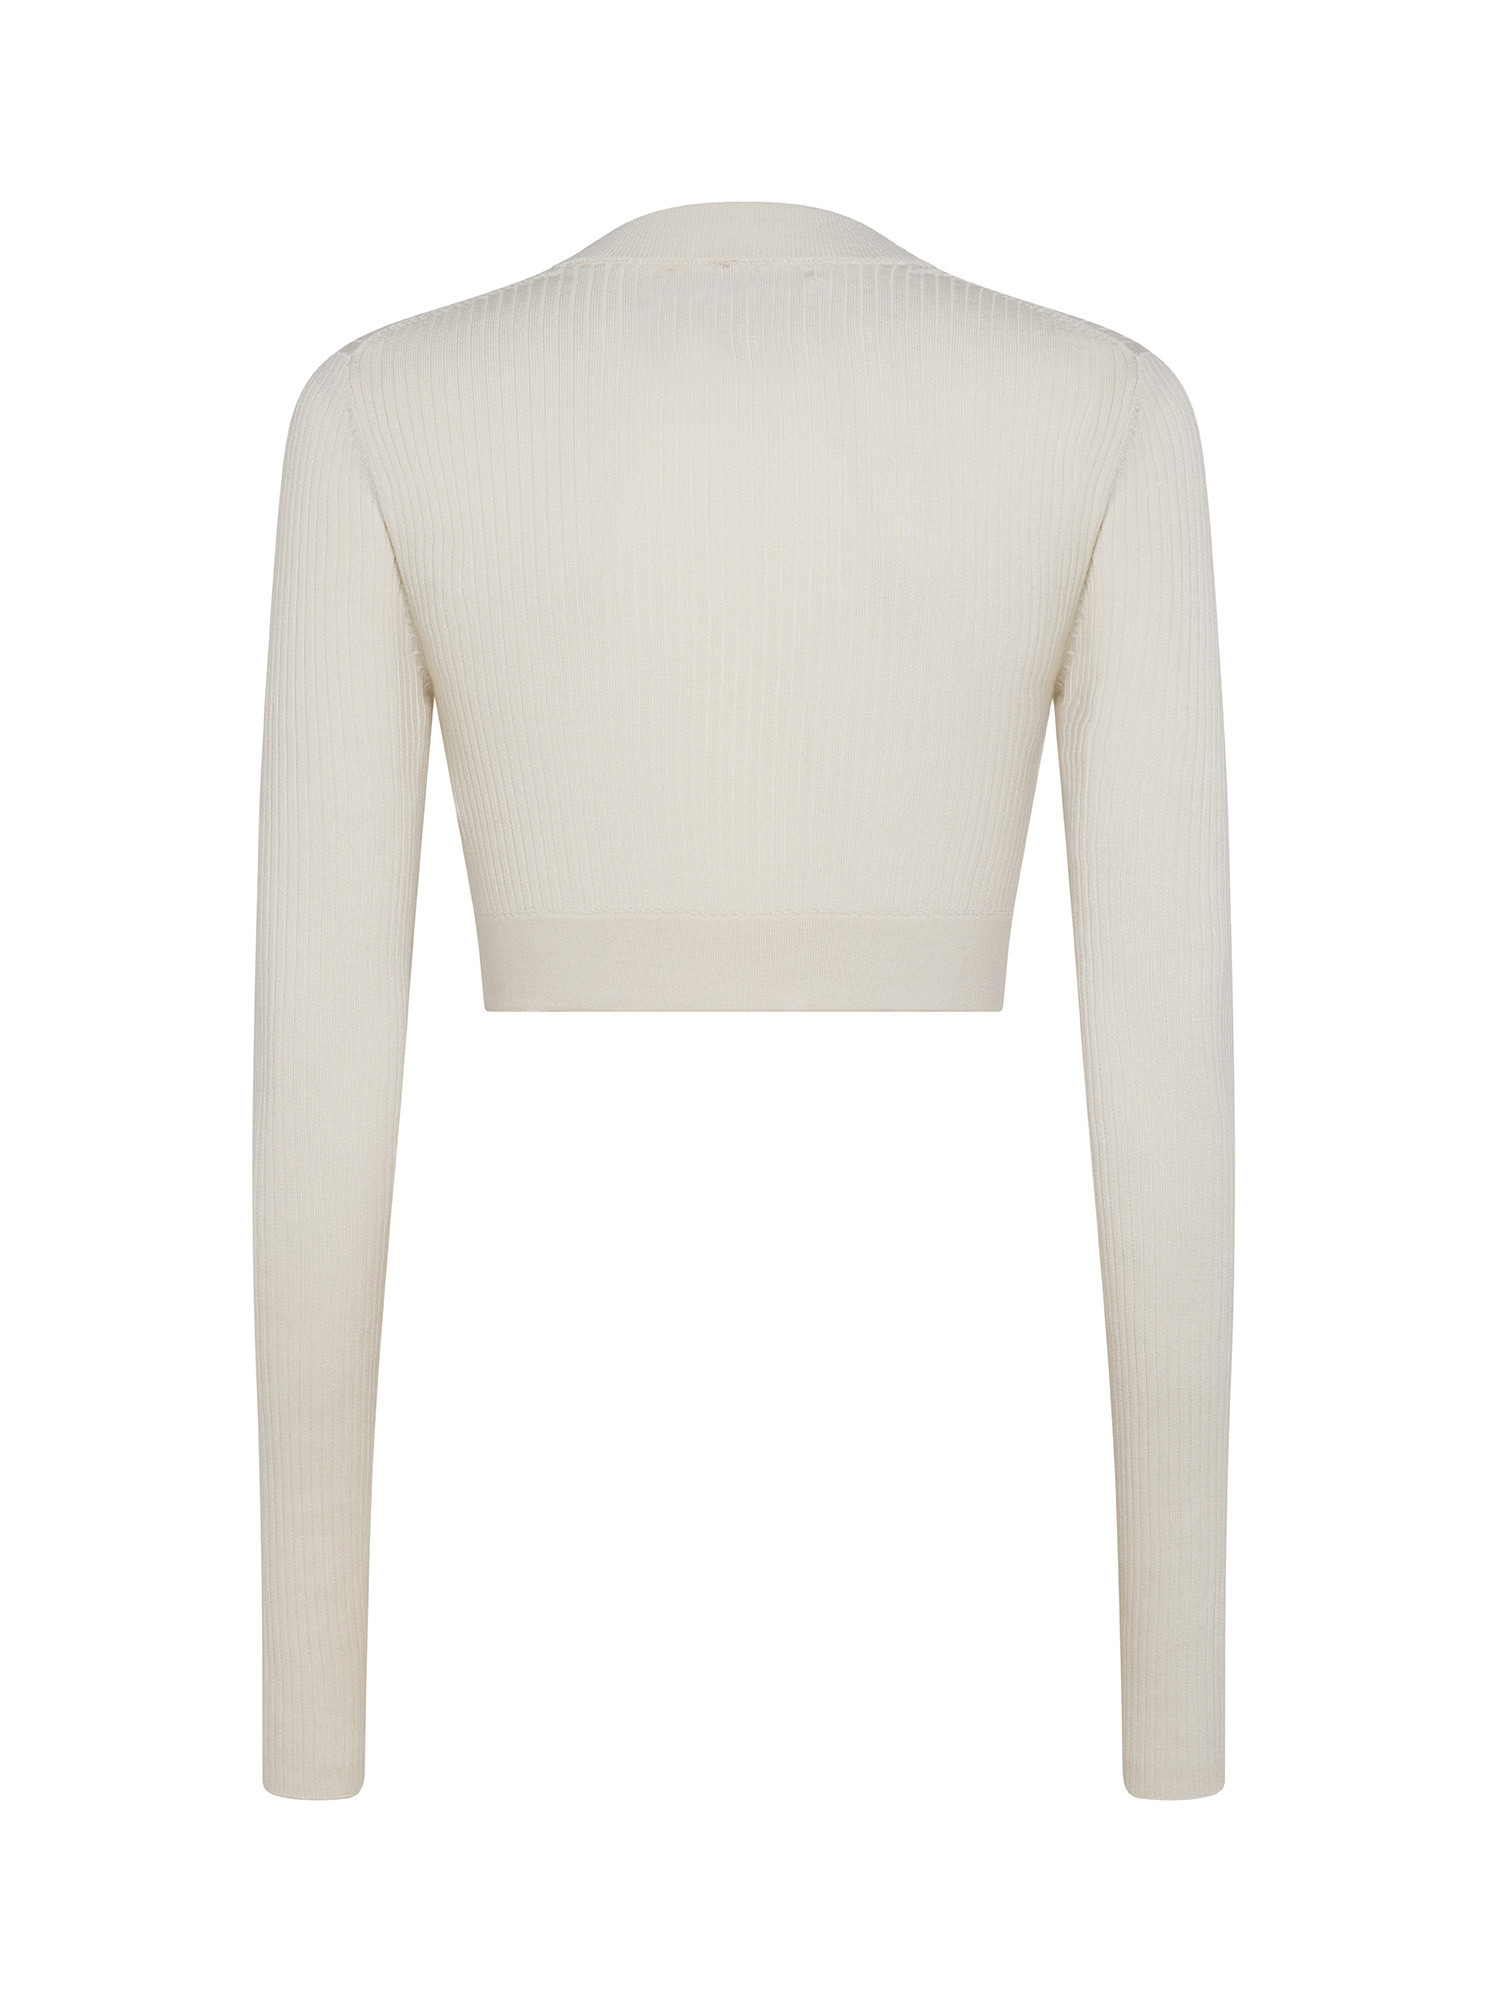 Calvin Klein Jeans - Crop sweater with cut out effect, White Ivory, large image number 1